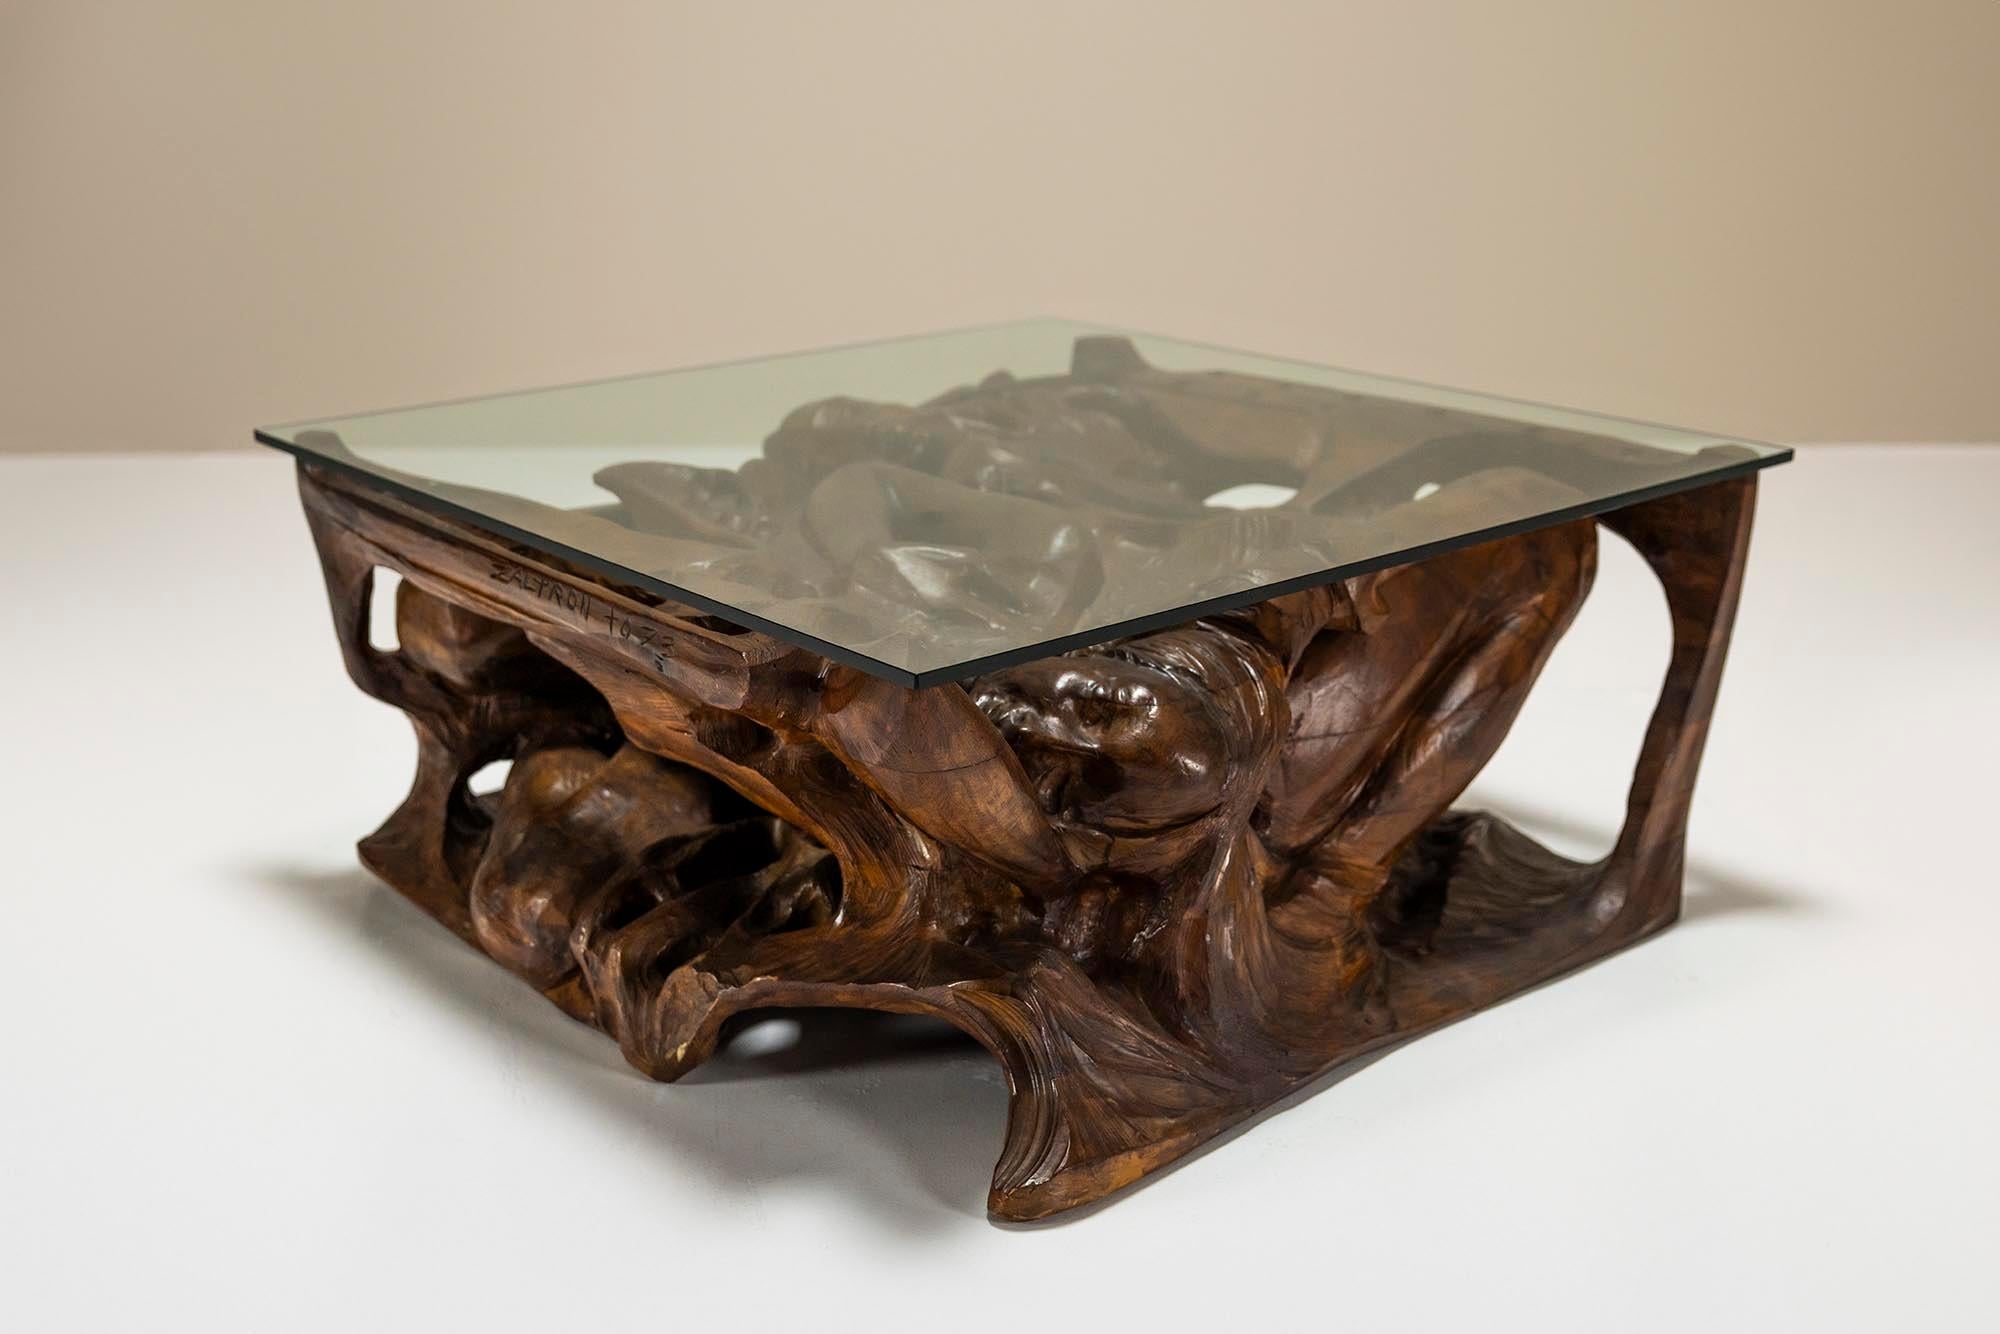 Italian Sculptural Coffee Table in Wood and Glass by Gian Paulo Zaltron For Sale